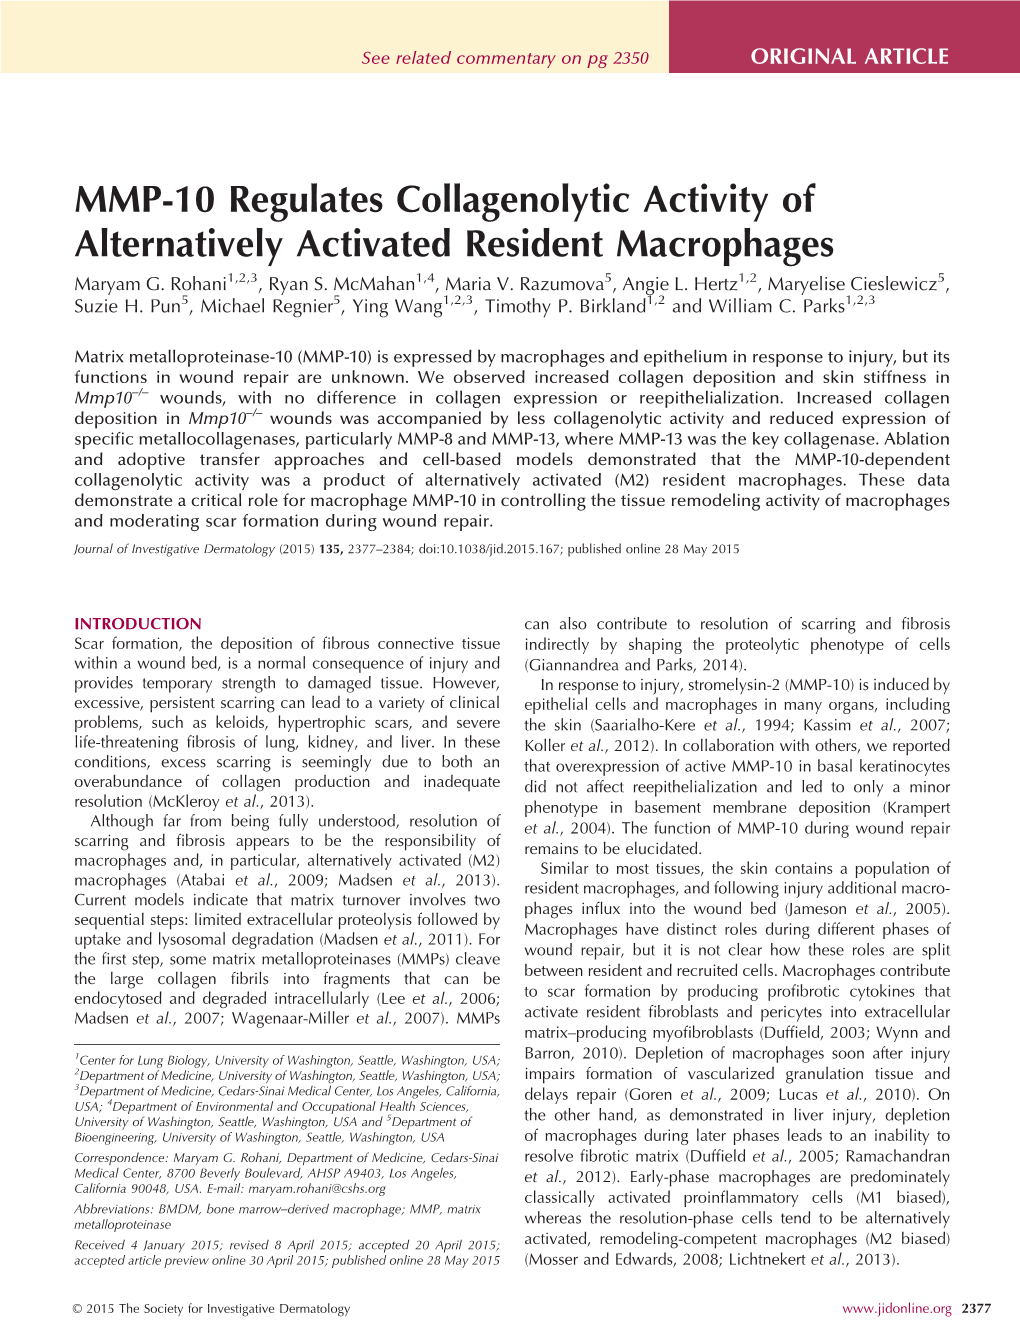 MMP-10 Regulates Collagenolytic Activity of Alternatively Activated Resident Macrophages Maryam G